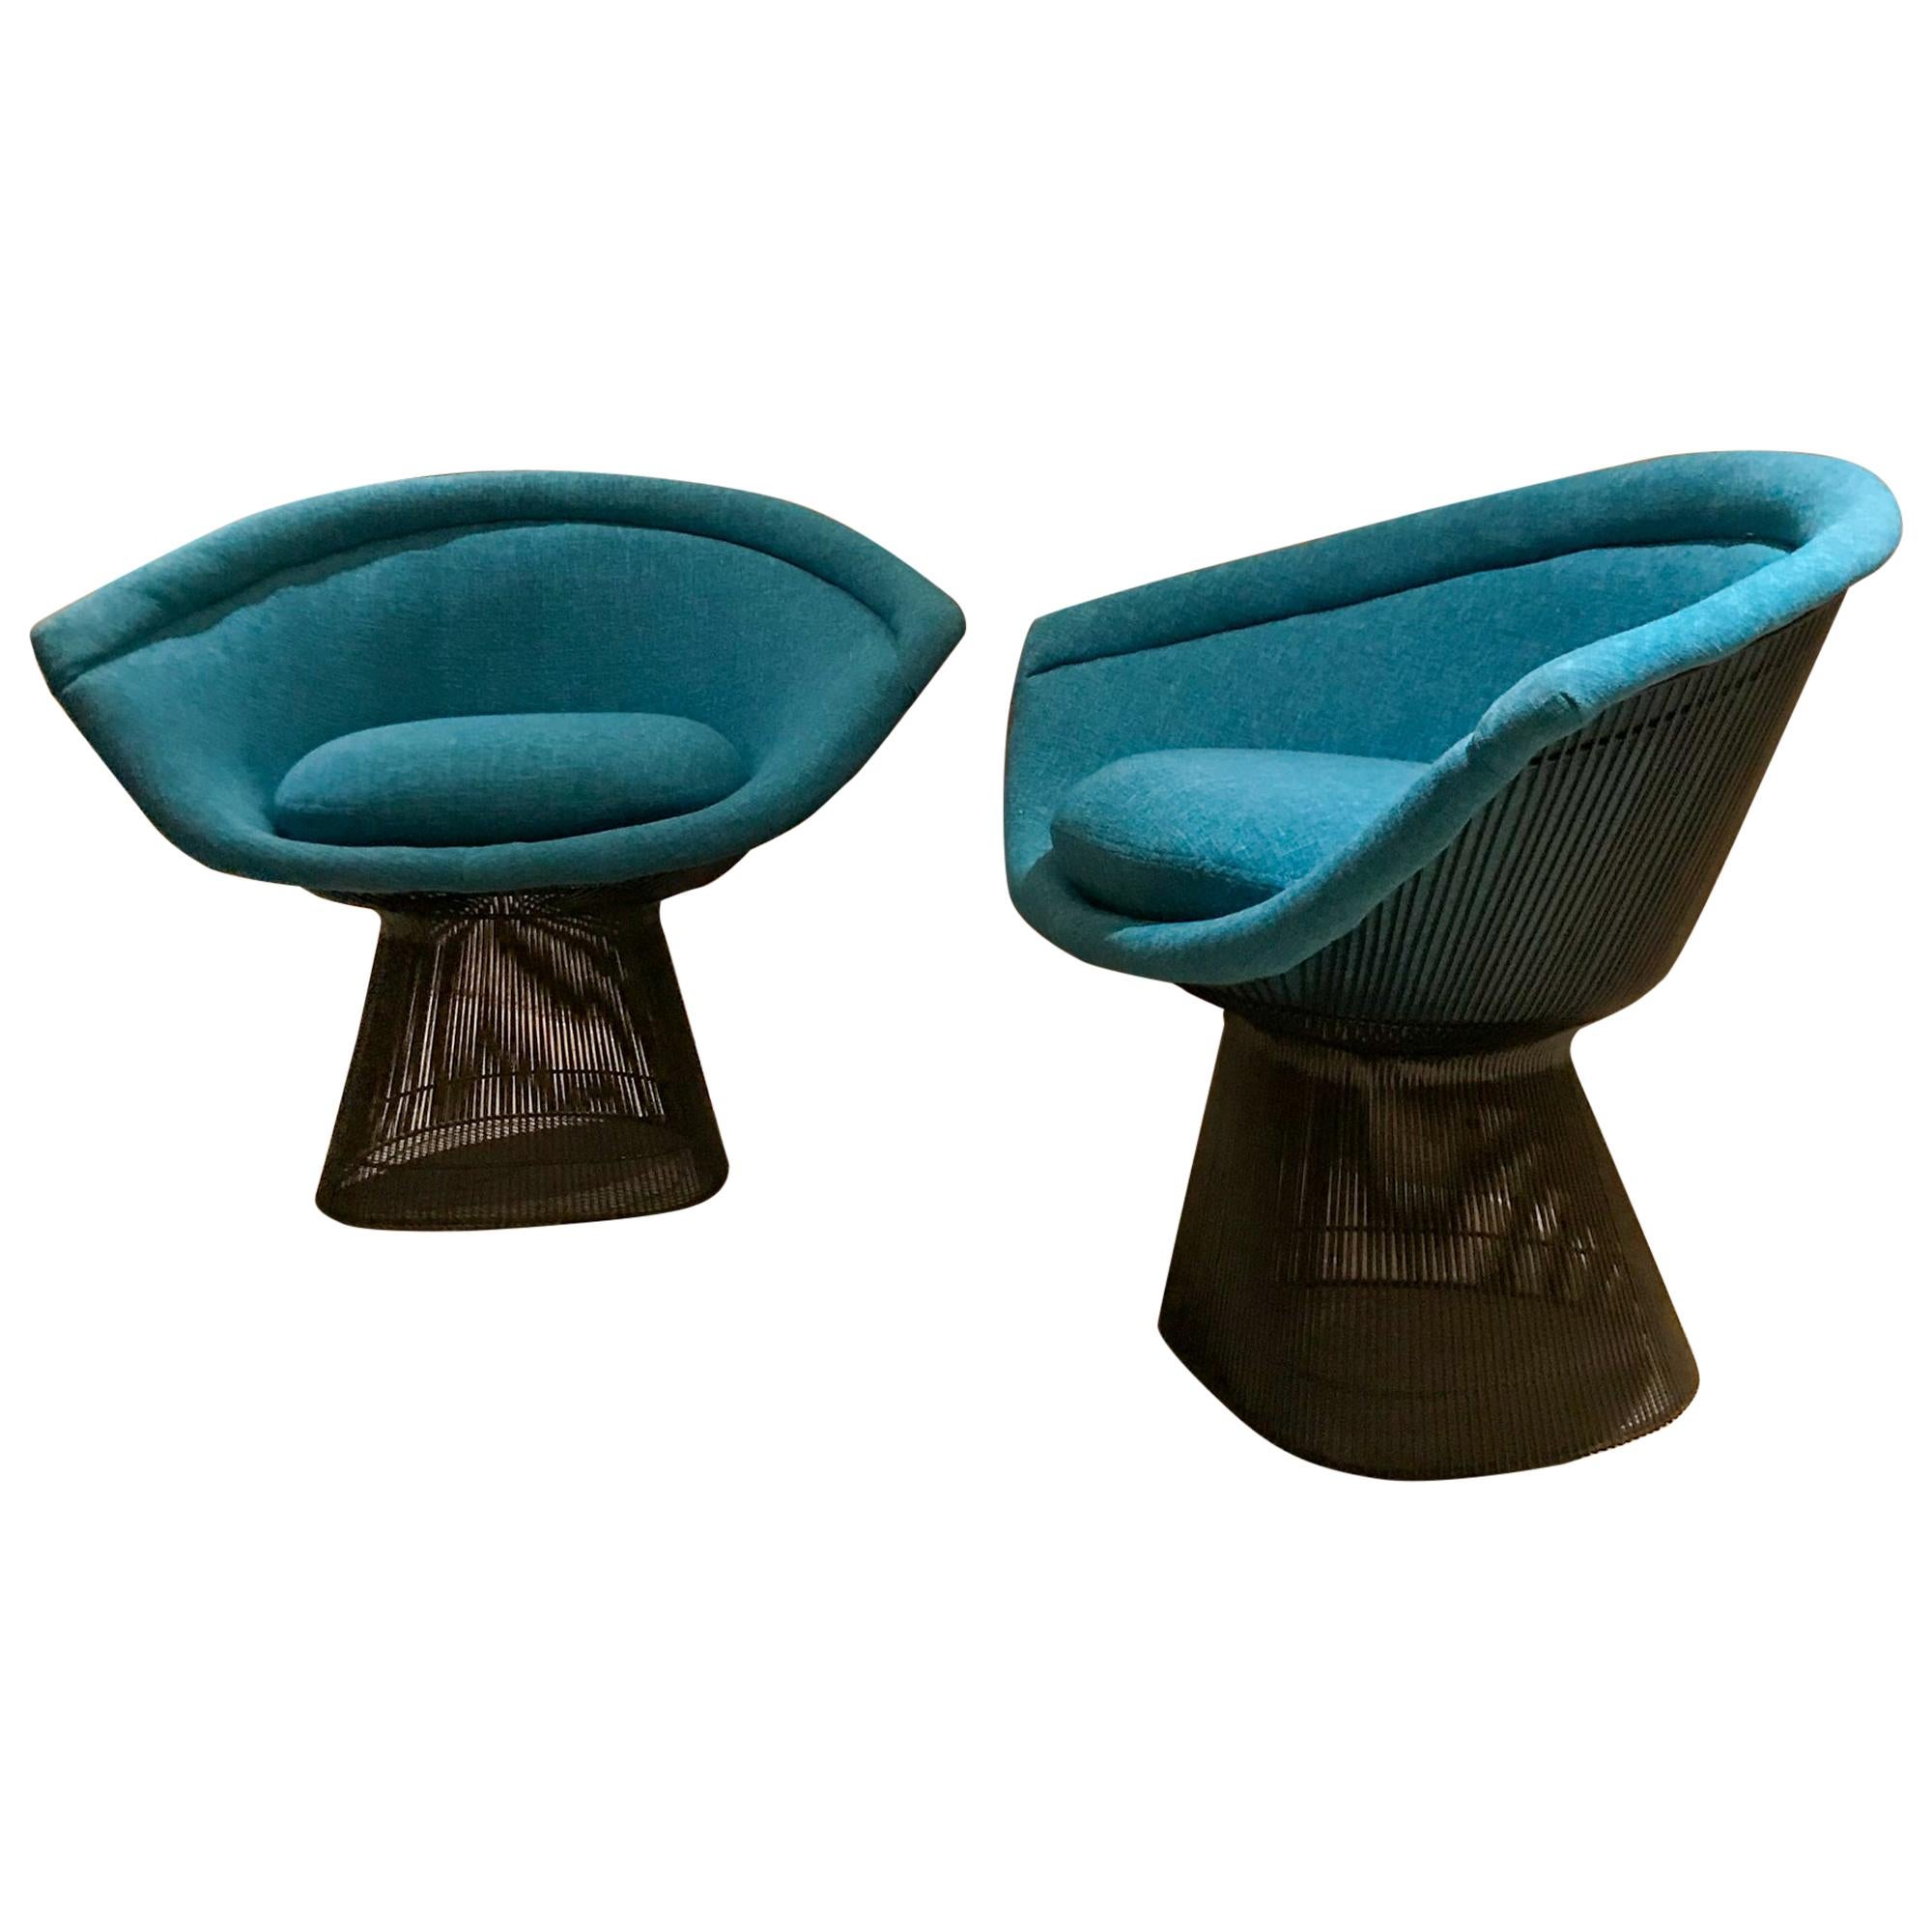 Warren Platner Inviting Teal Blue & Bronze Iconic Steel Knoll Lounge Chairs 